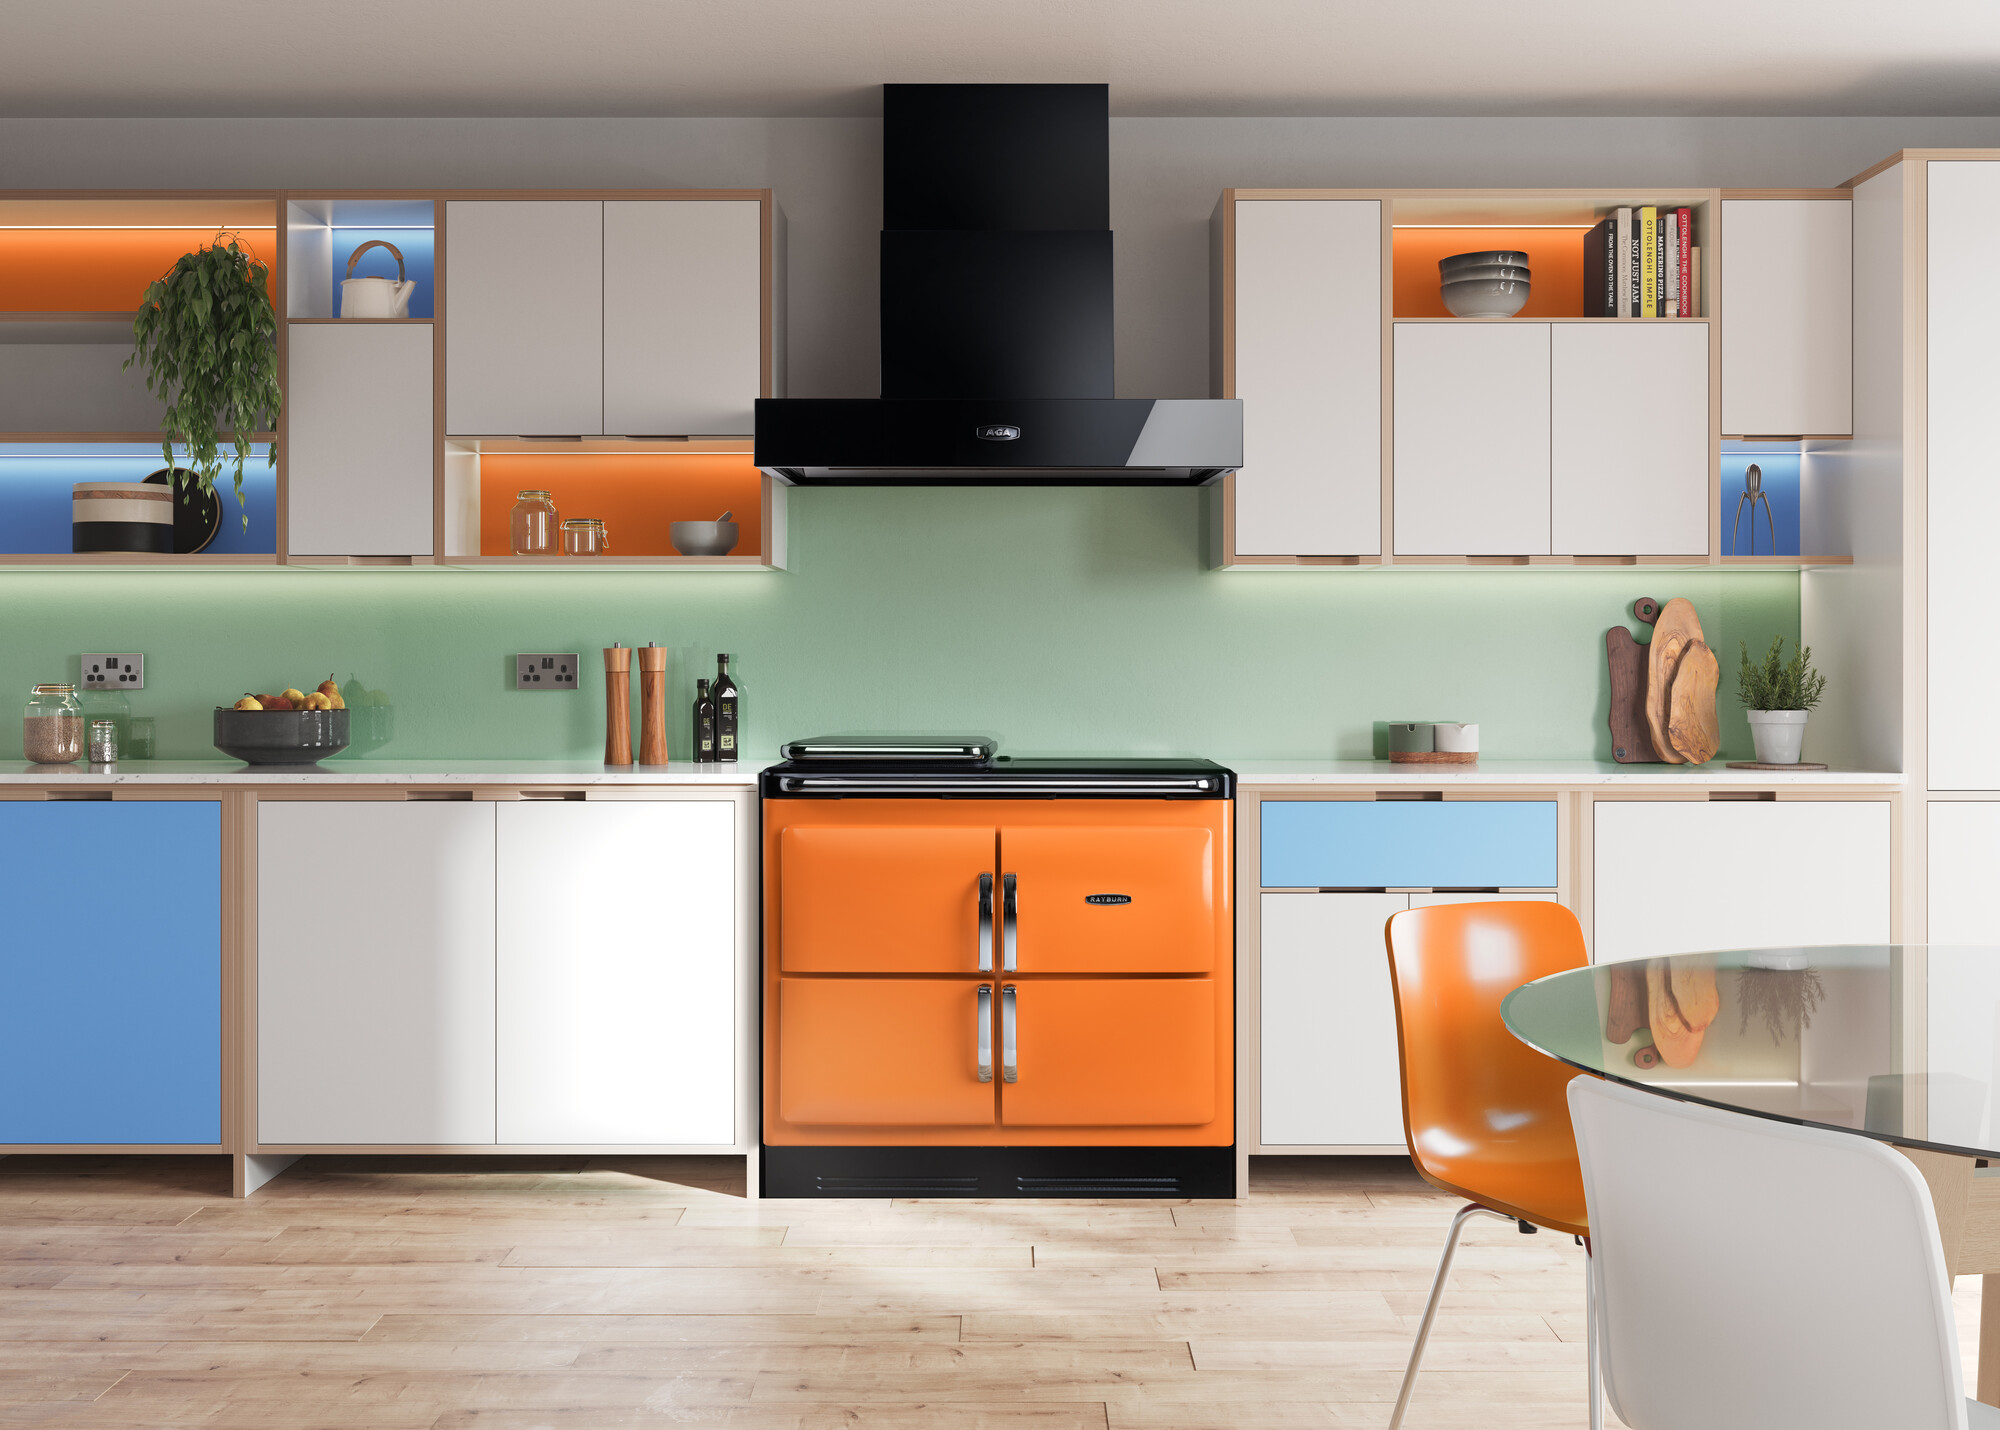 How To Create The Perfect Retro-style Kitchen